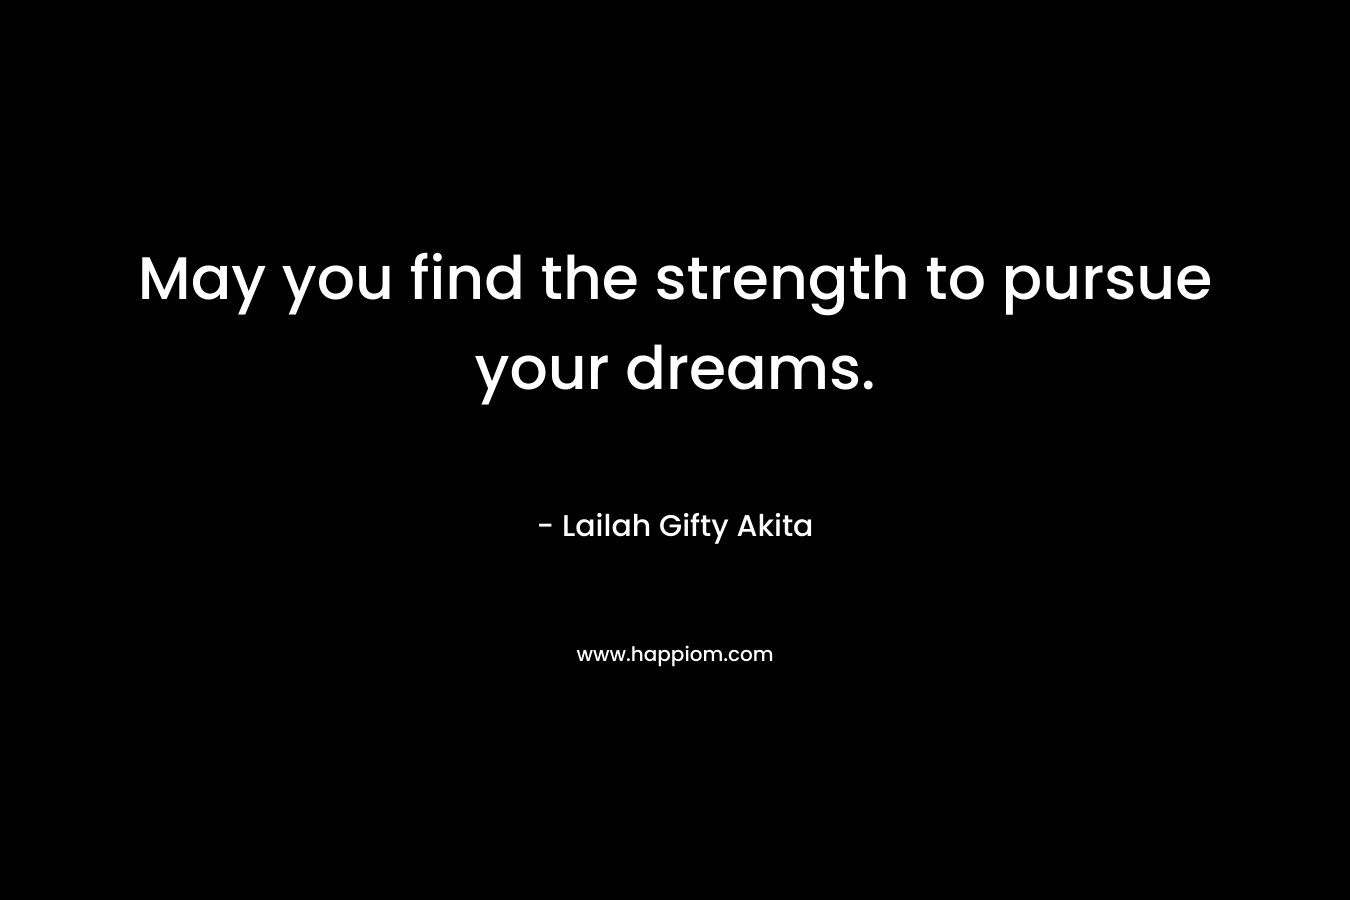 May you find the strength to pursue your dreams.